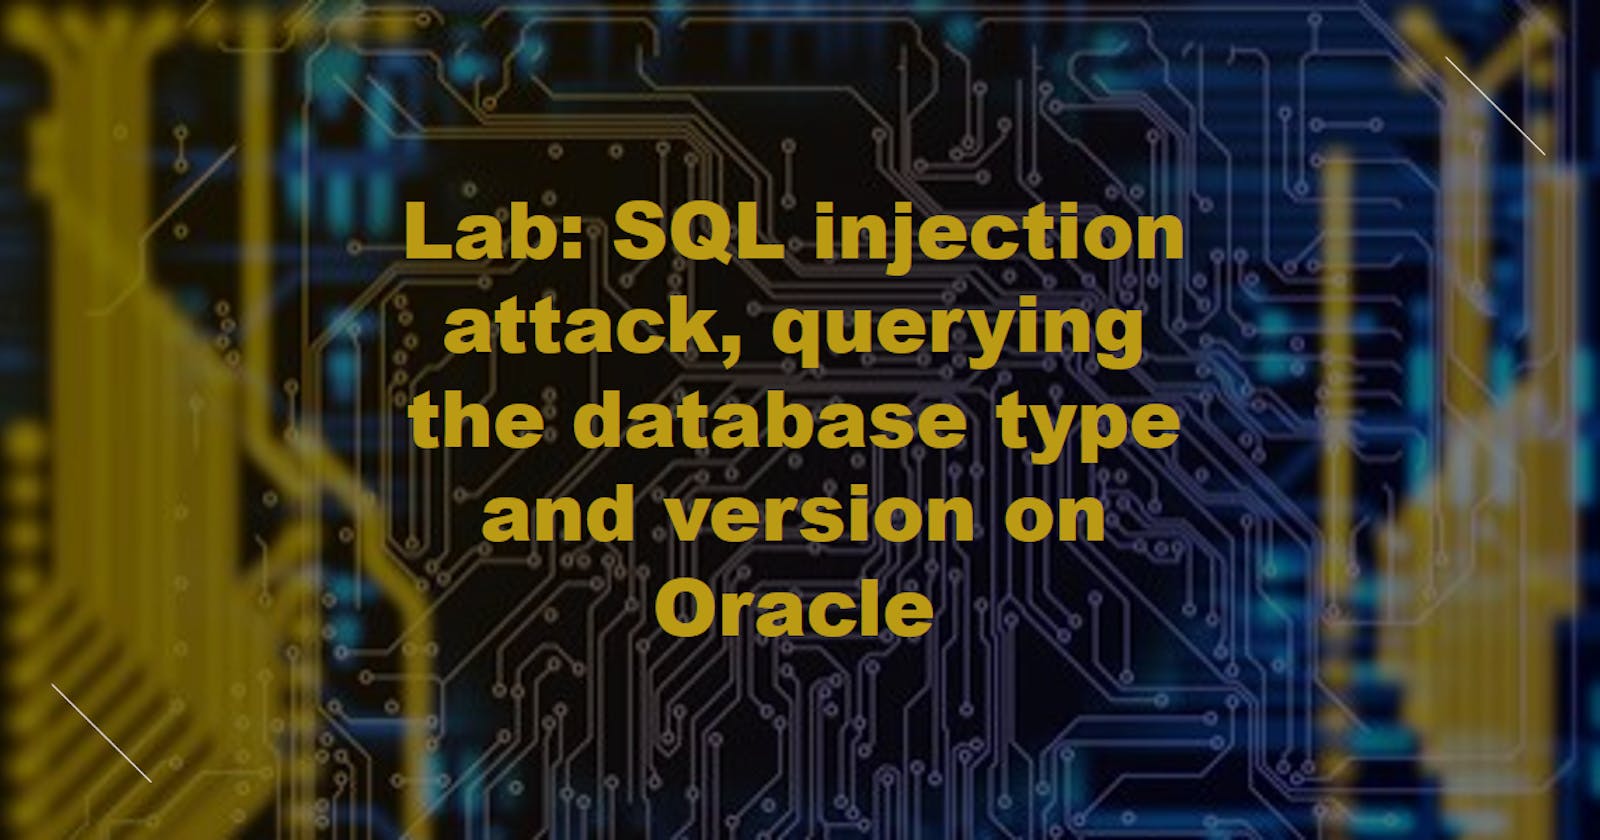 Lab: SQL injection attack, querying the database type and version on Oracle